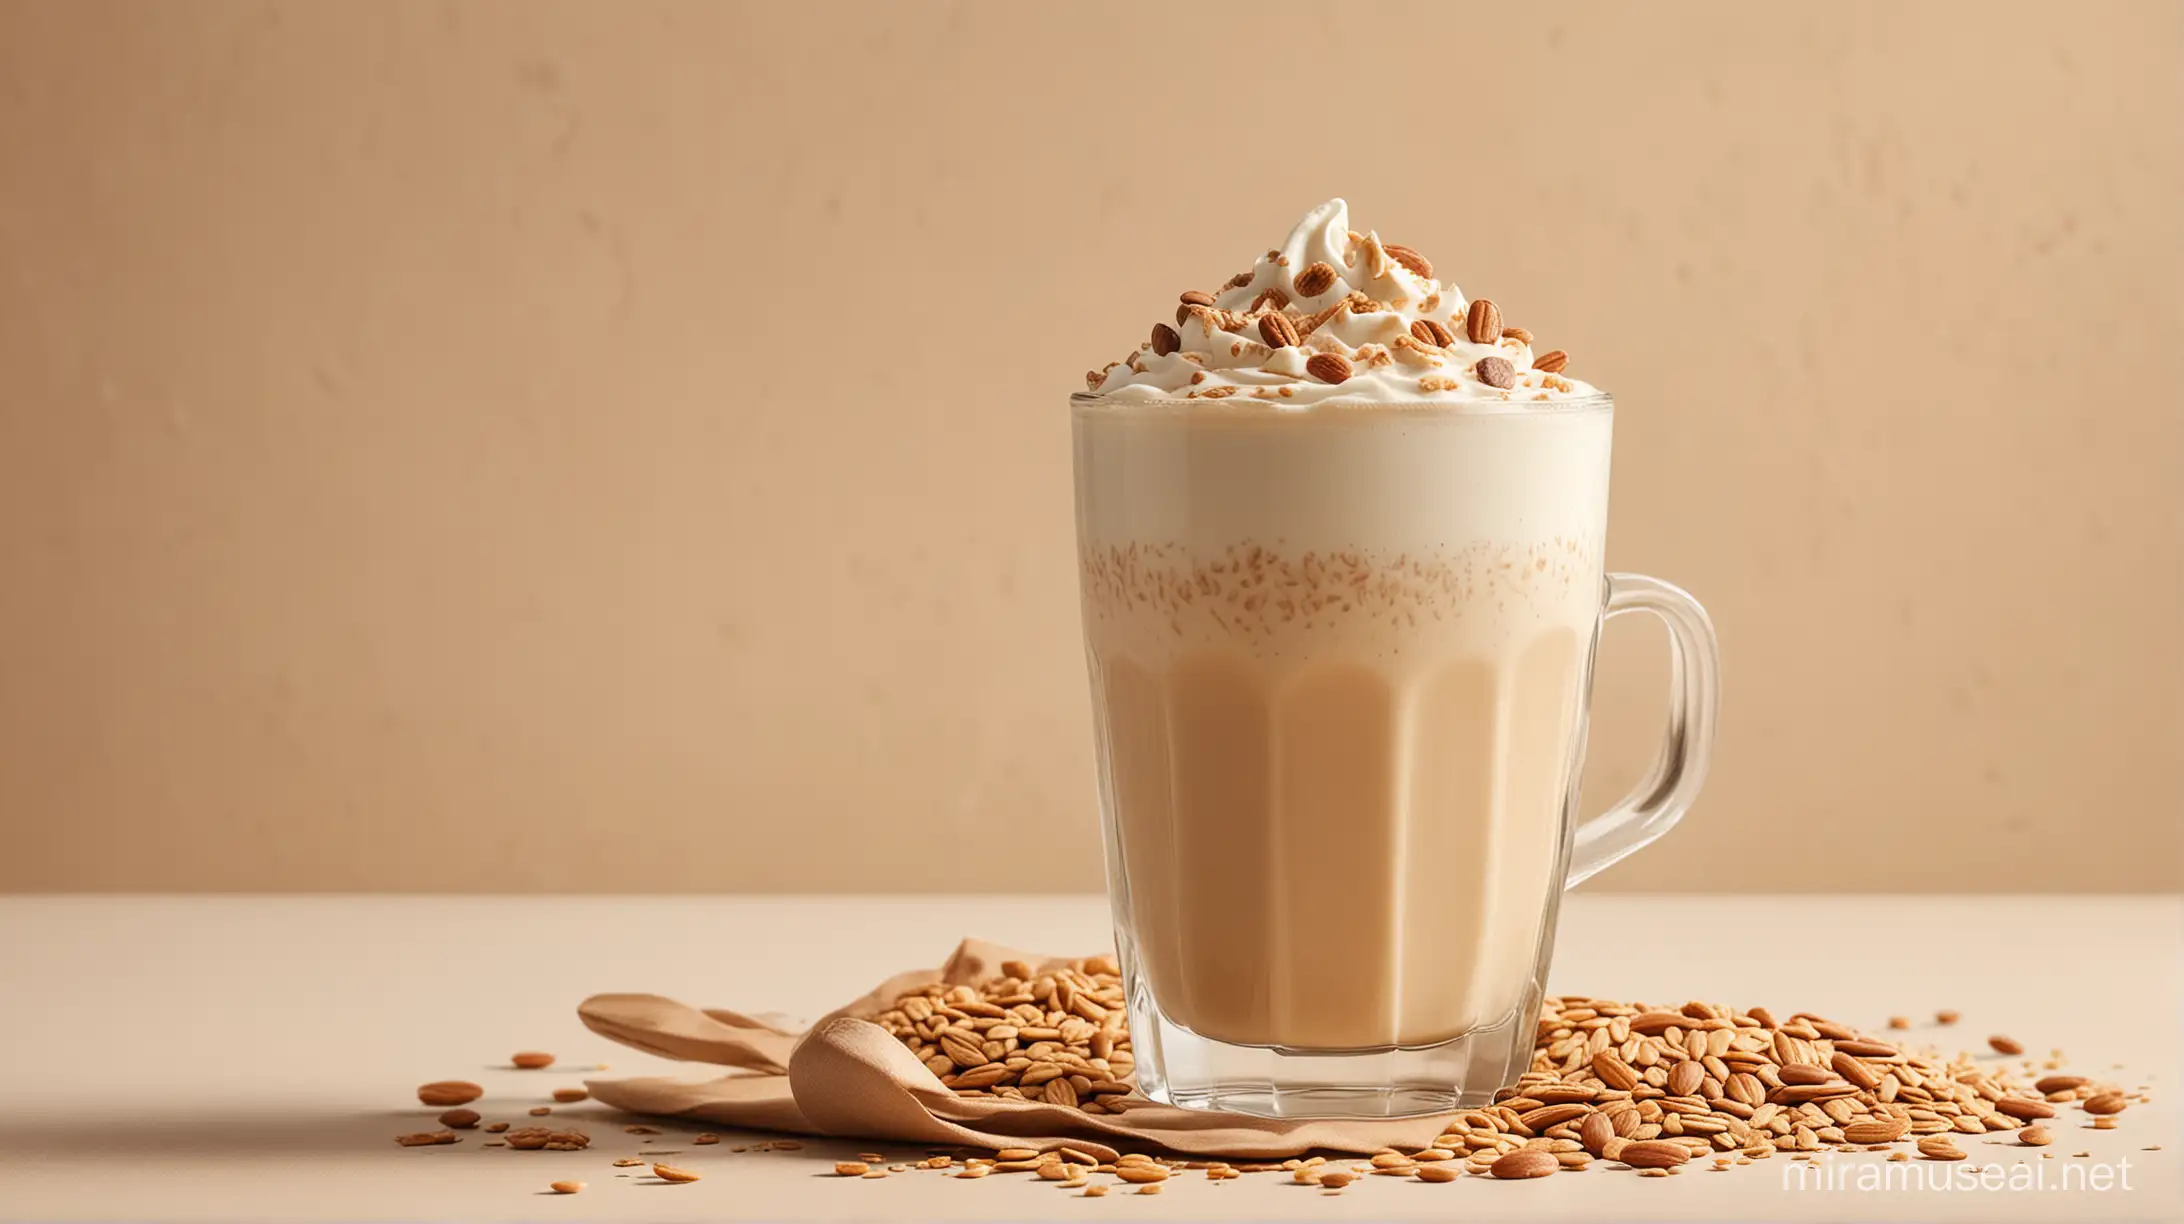 create an image of an oats milk latte with a cream background and light tones